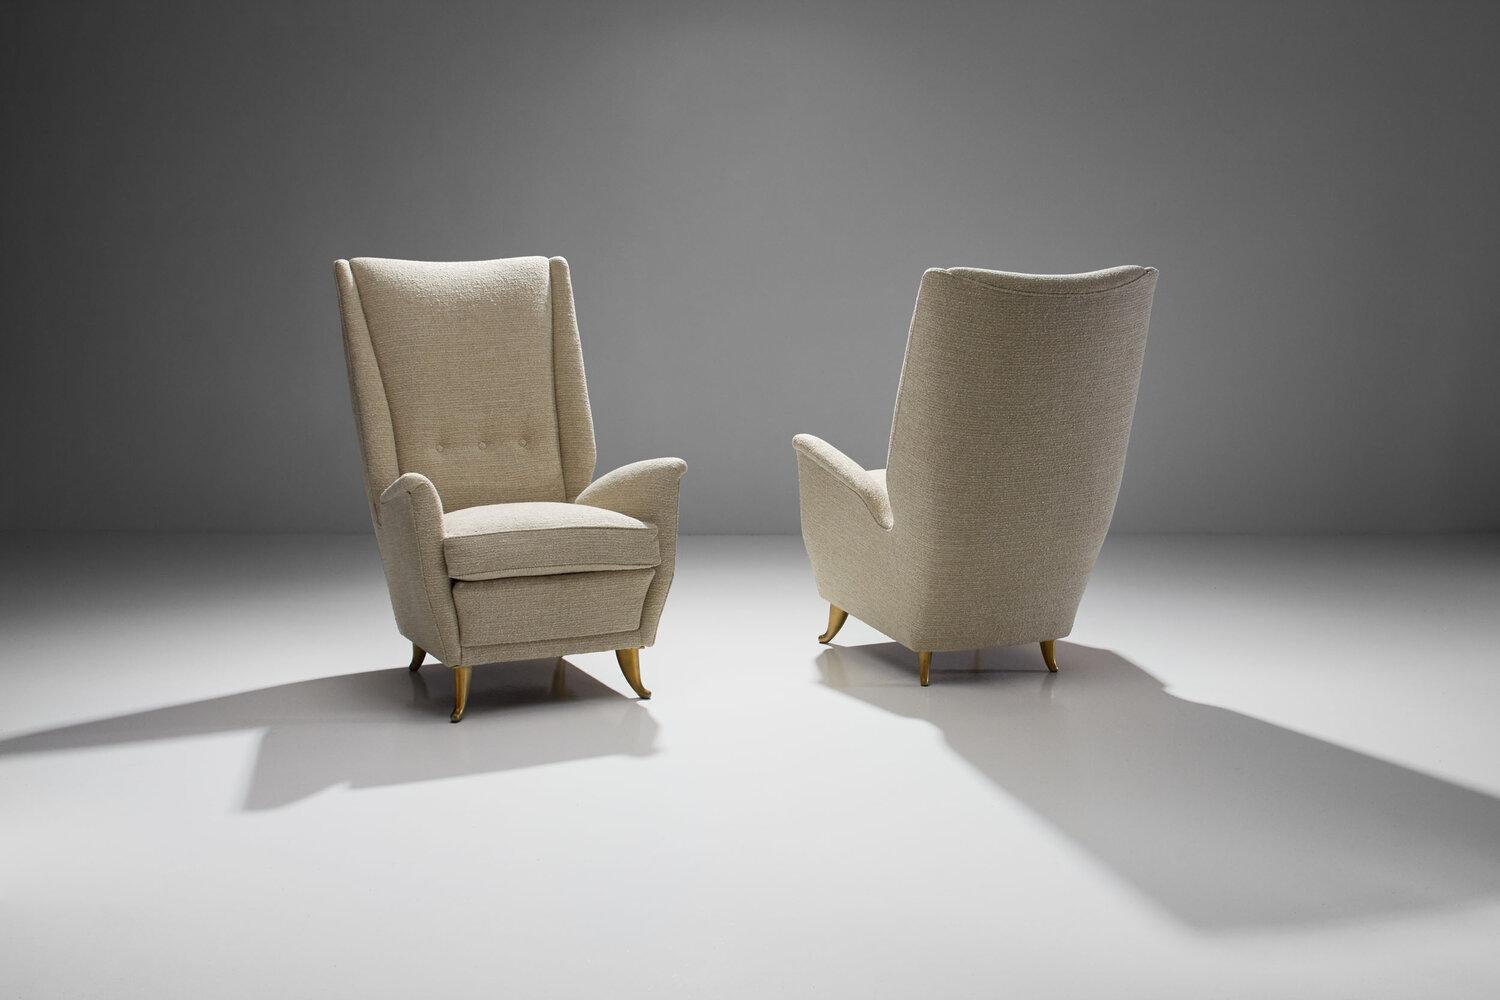 Mid-20th Century Pair of Lounge Chairs Attributed to Gio Ponti for ISA Bergamo, Italy, 1950s